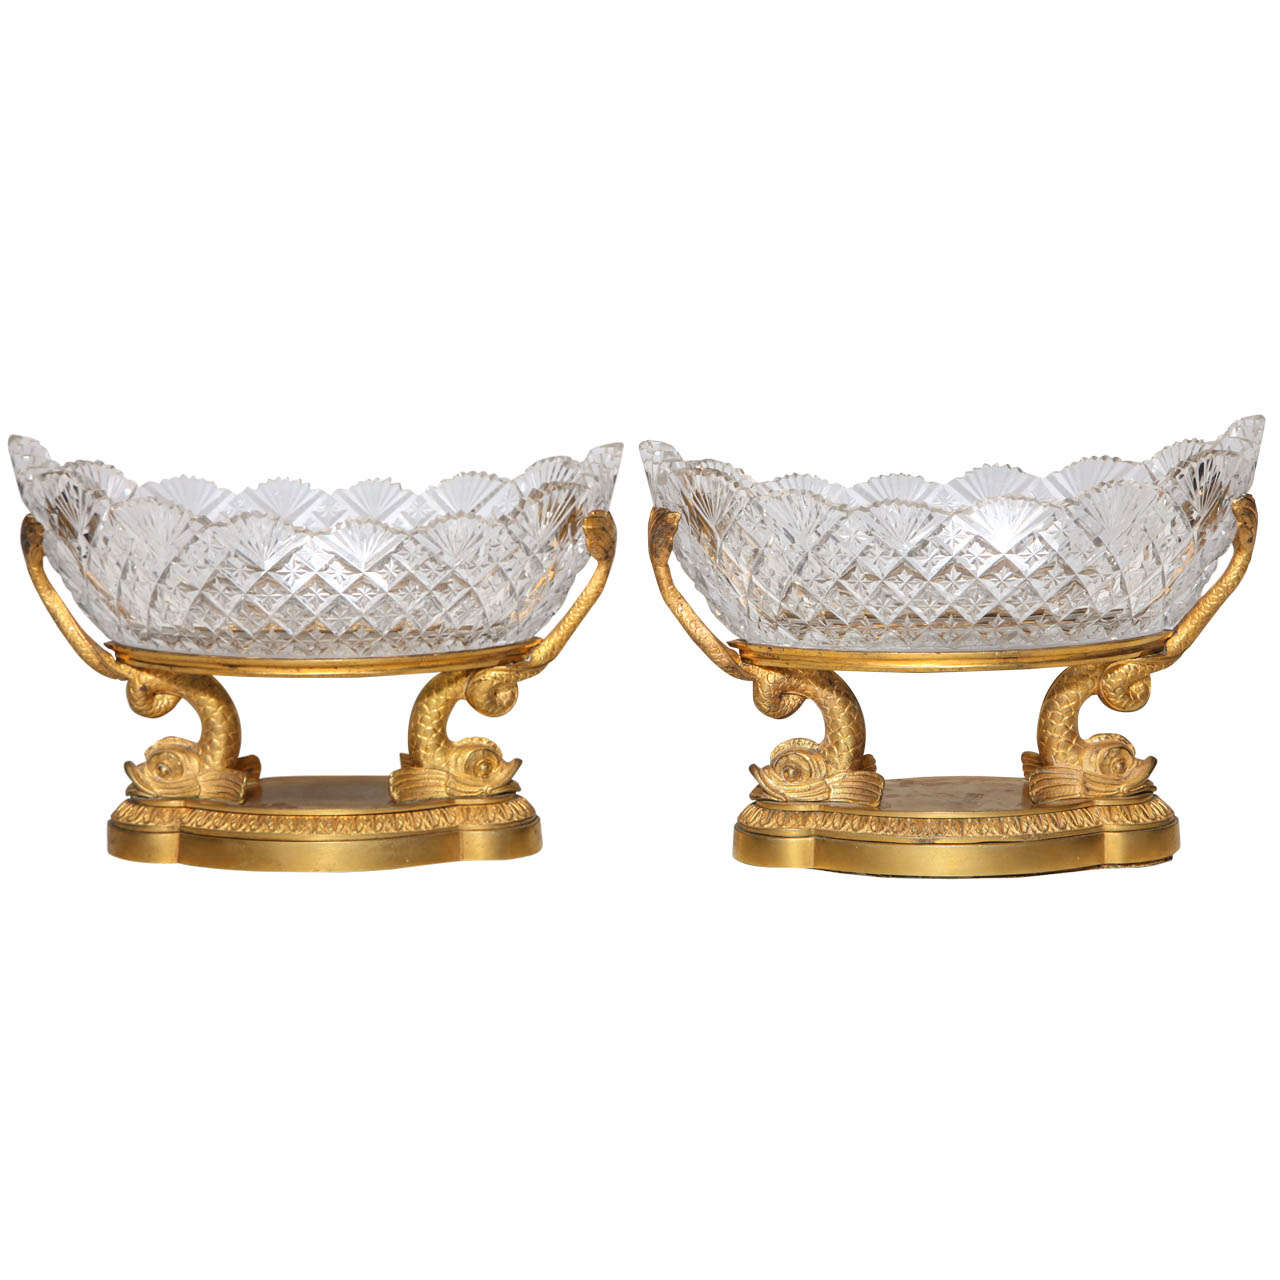 A Rare Pair of Antique Russian Crystal and Dore Bronze dolphin Centerpieces For Sale